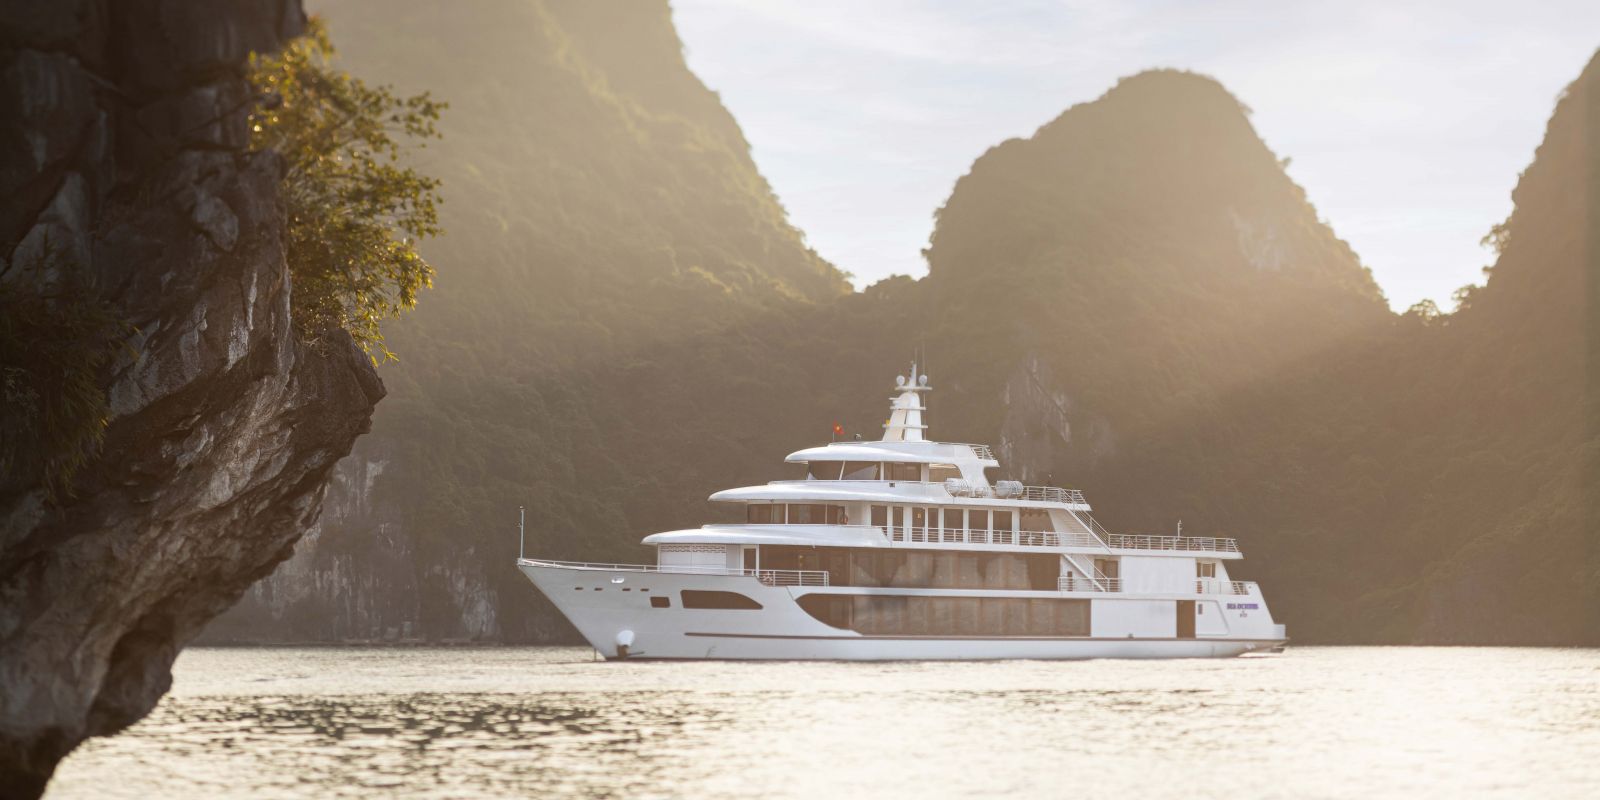 Sea Octopus Cruise, The most luxurious gastronomy cruise, in Halong bay